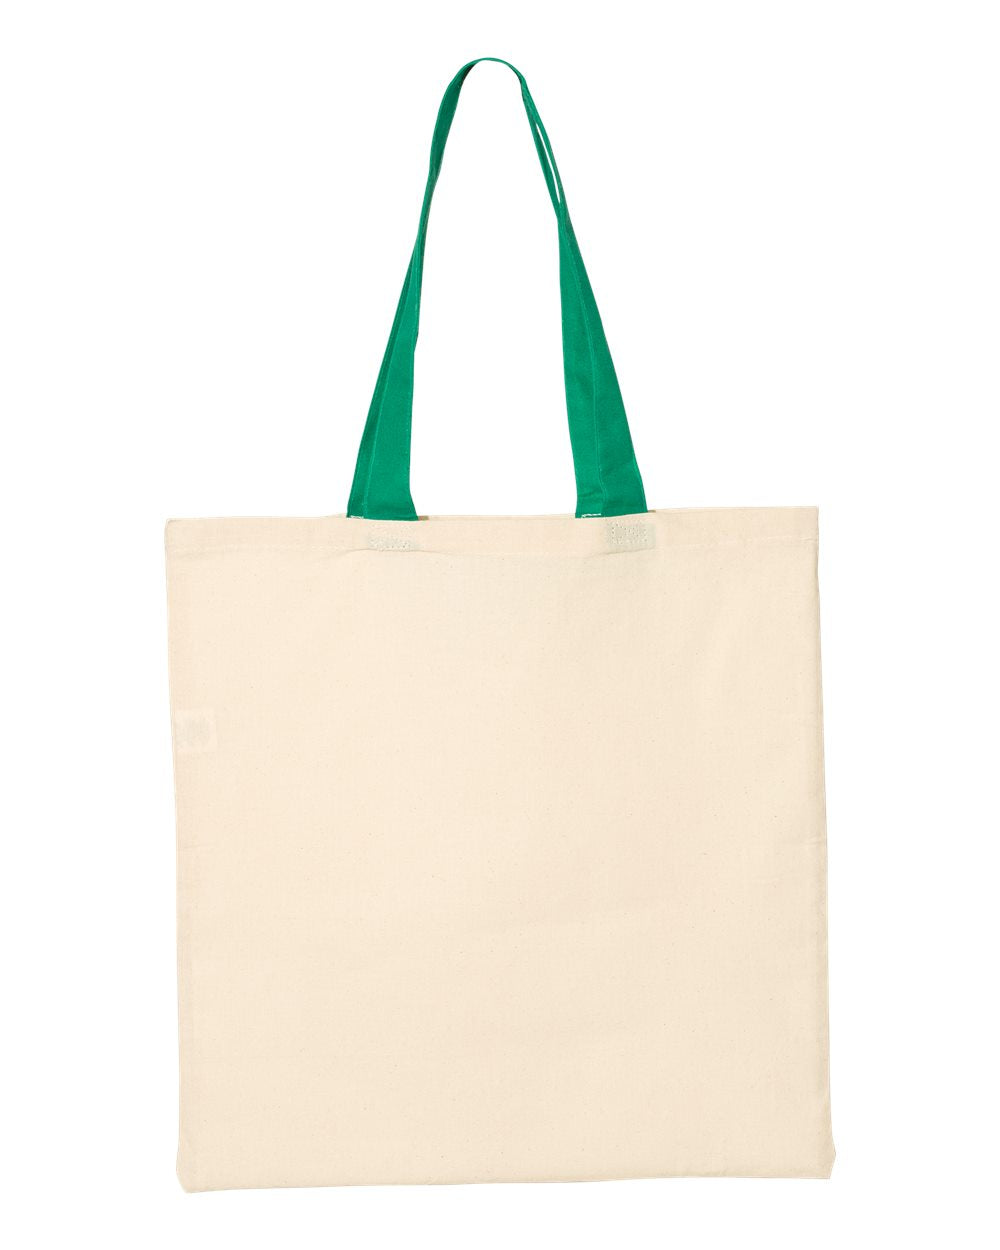 Q-Tees Economical Tote with Contrast-Color Handles